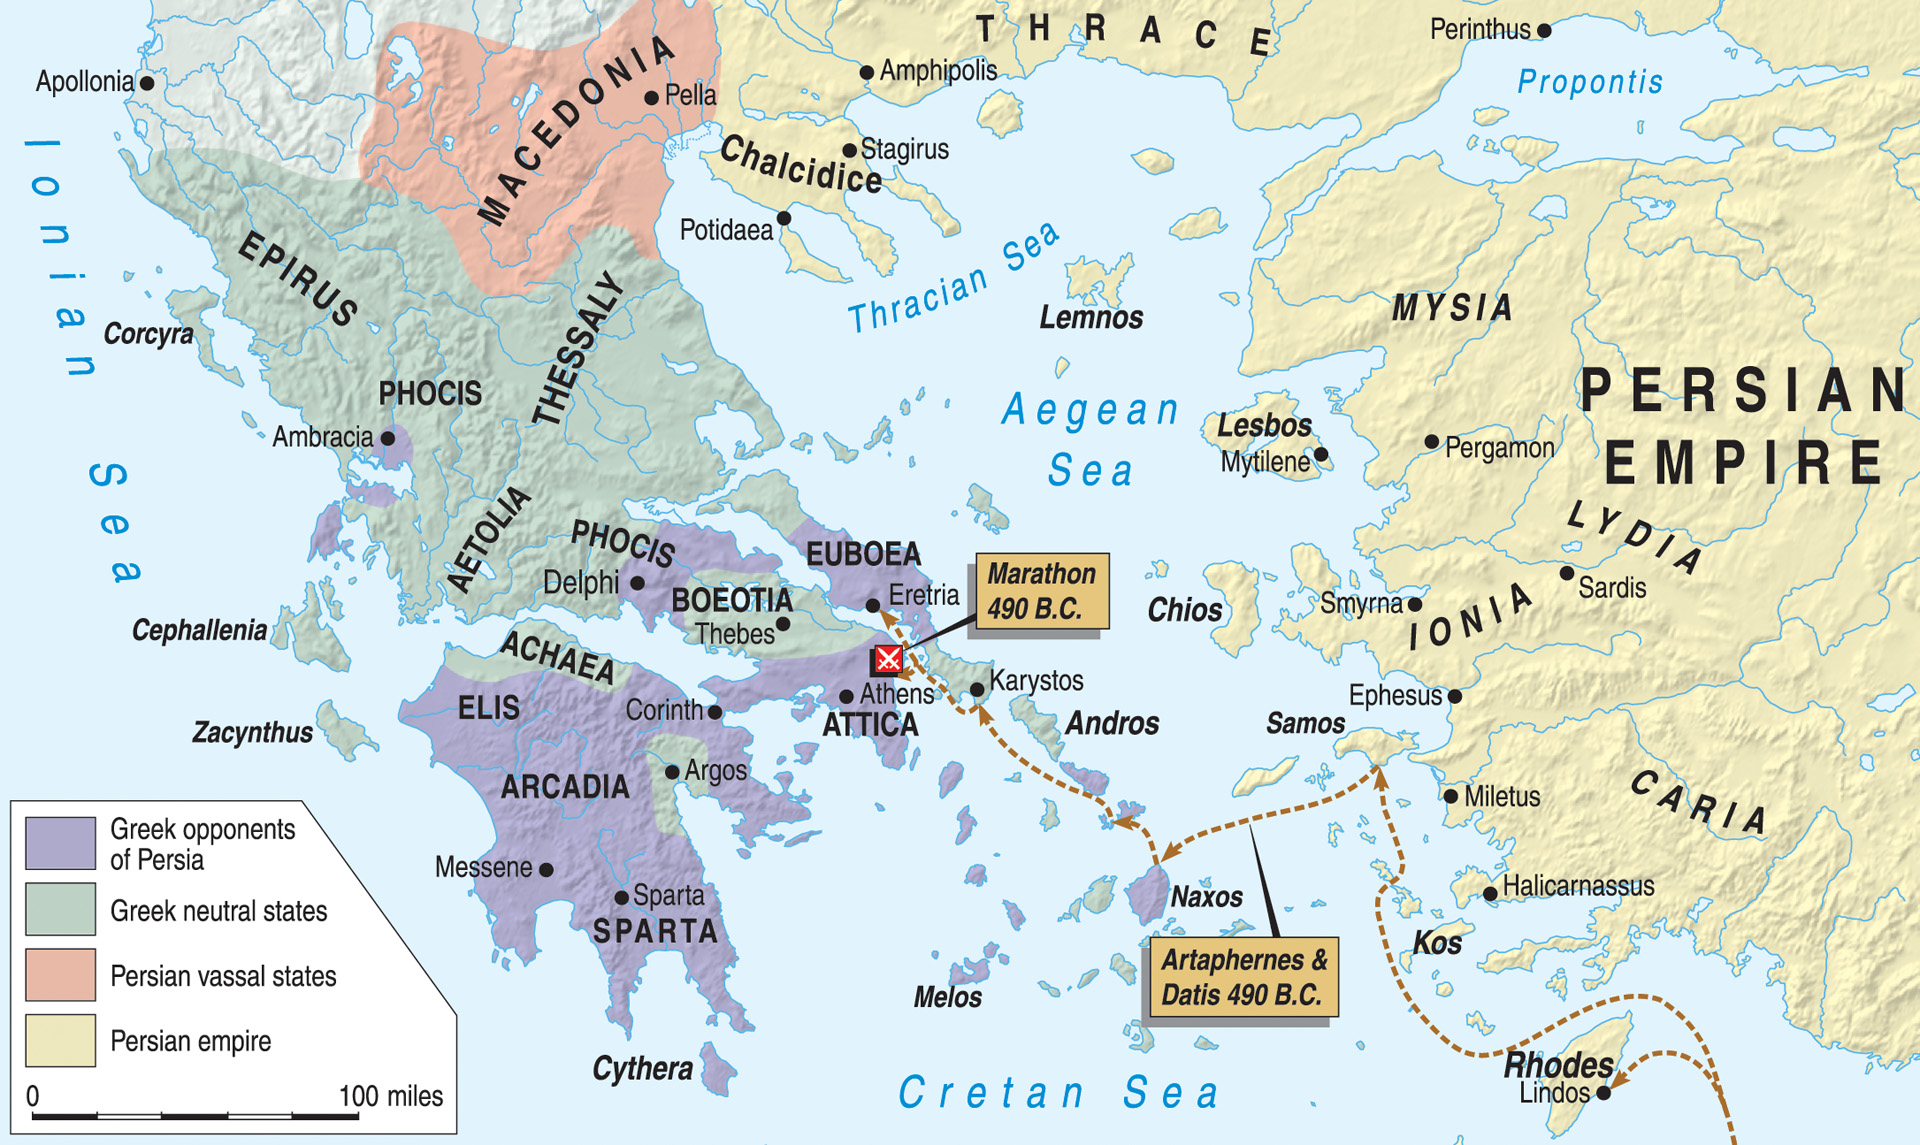 Persian commander Datis had orders to subdue the prominent island states of the Cyclades and then punish Eretria and Athens for their participation in the Ionian Revolt.